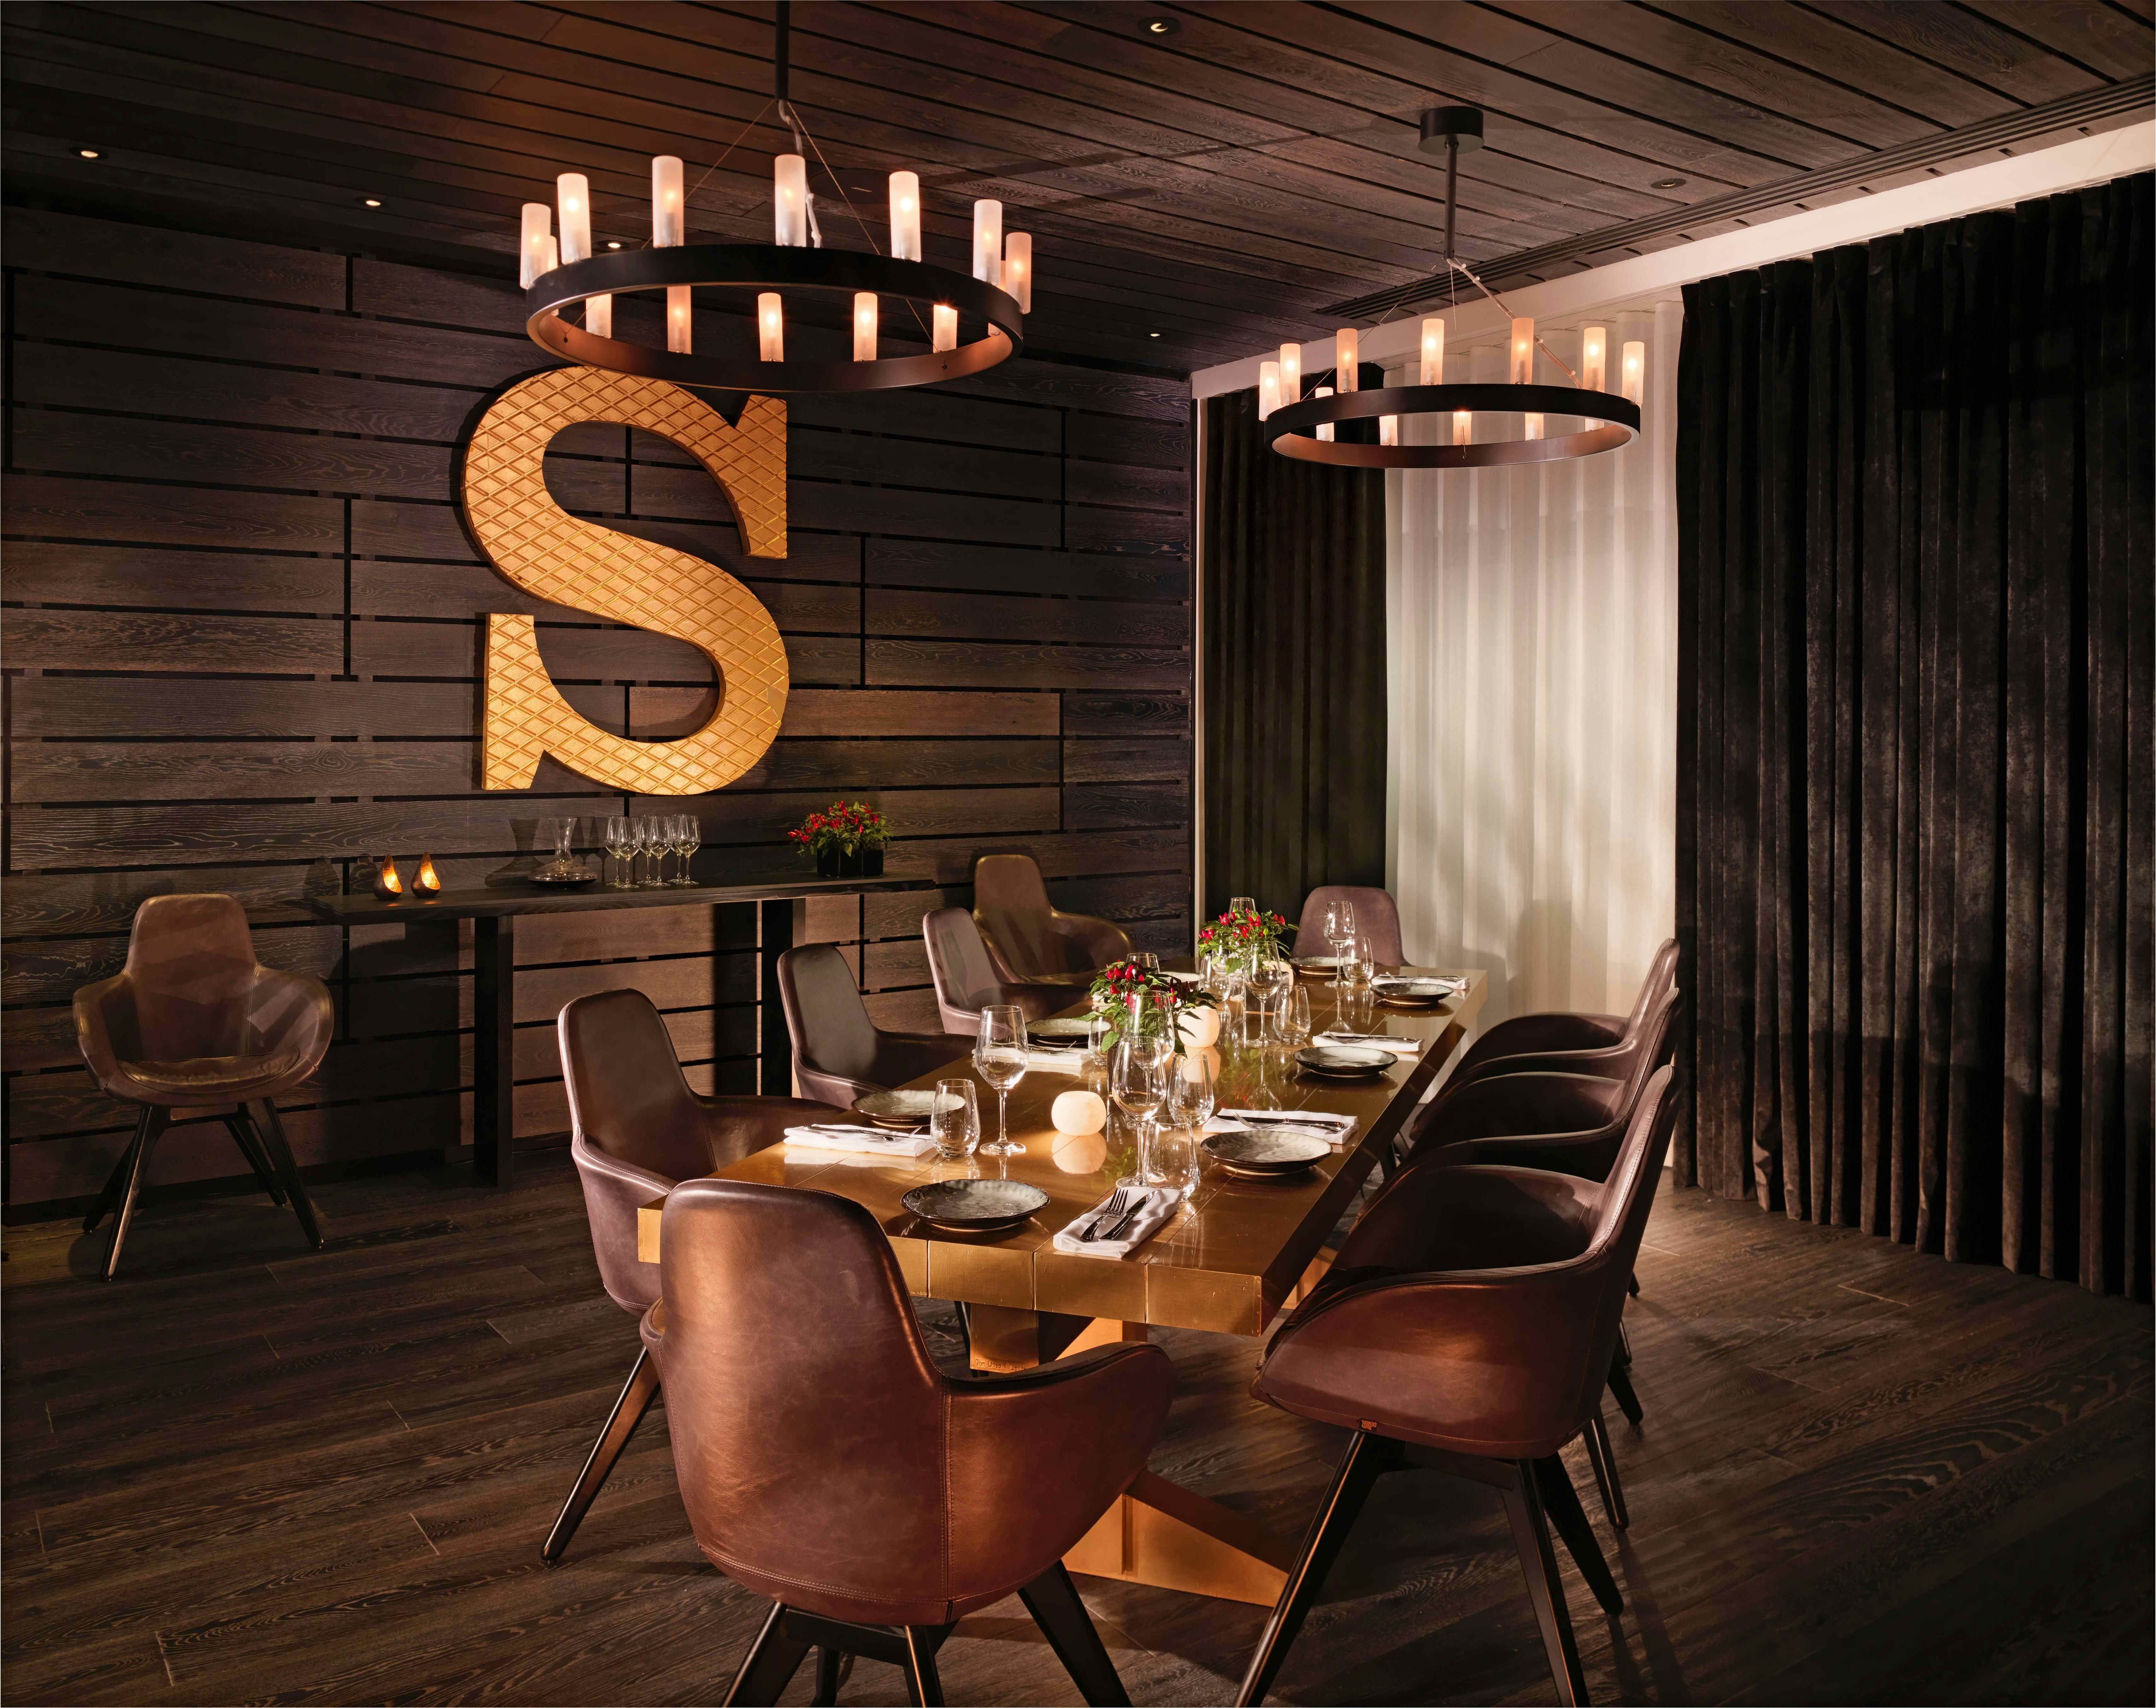 Sea Containers Restaurant Private Dining Room, Sea Containers Hotel